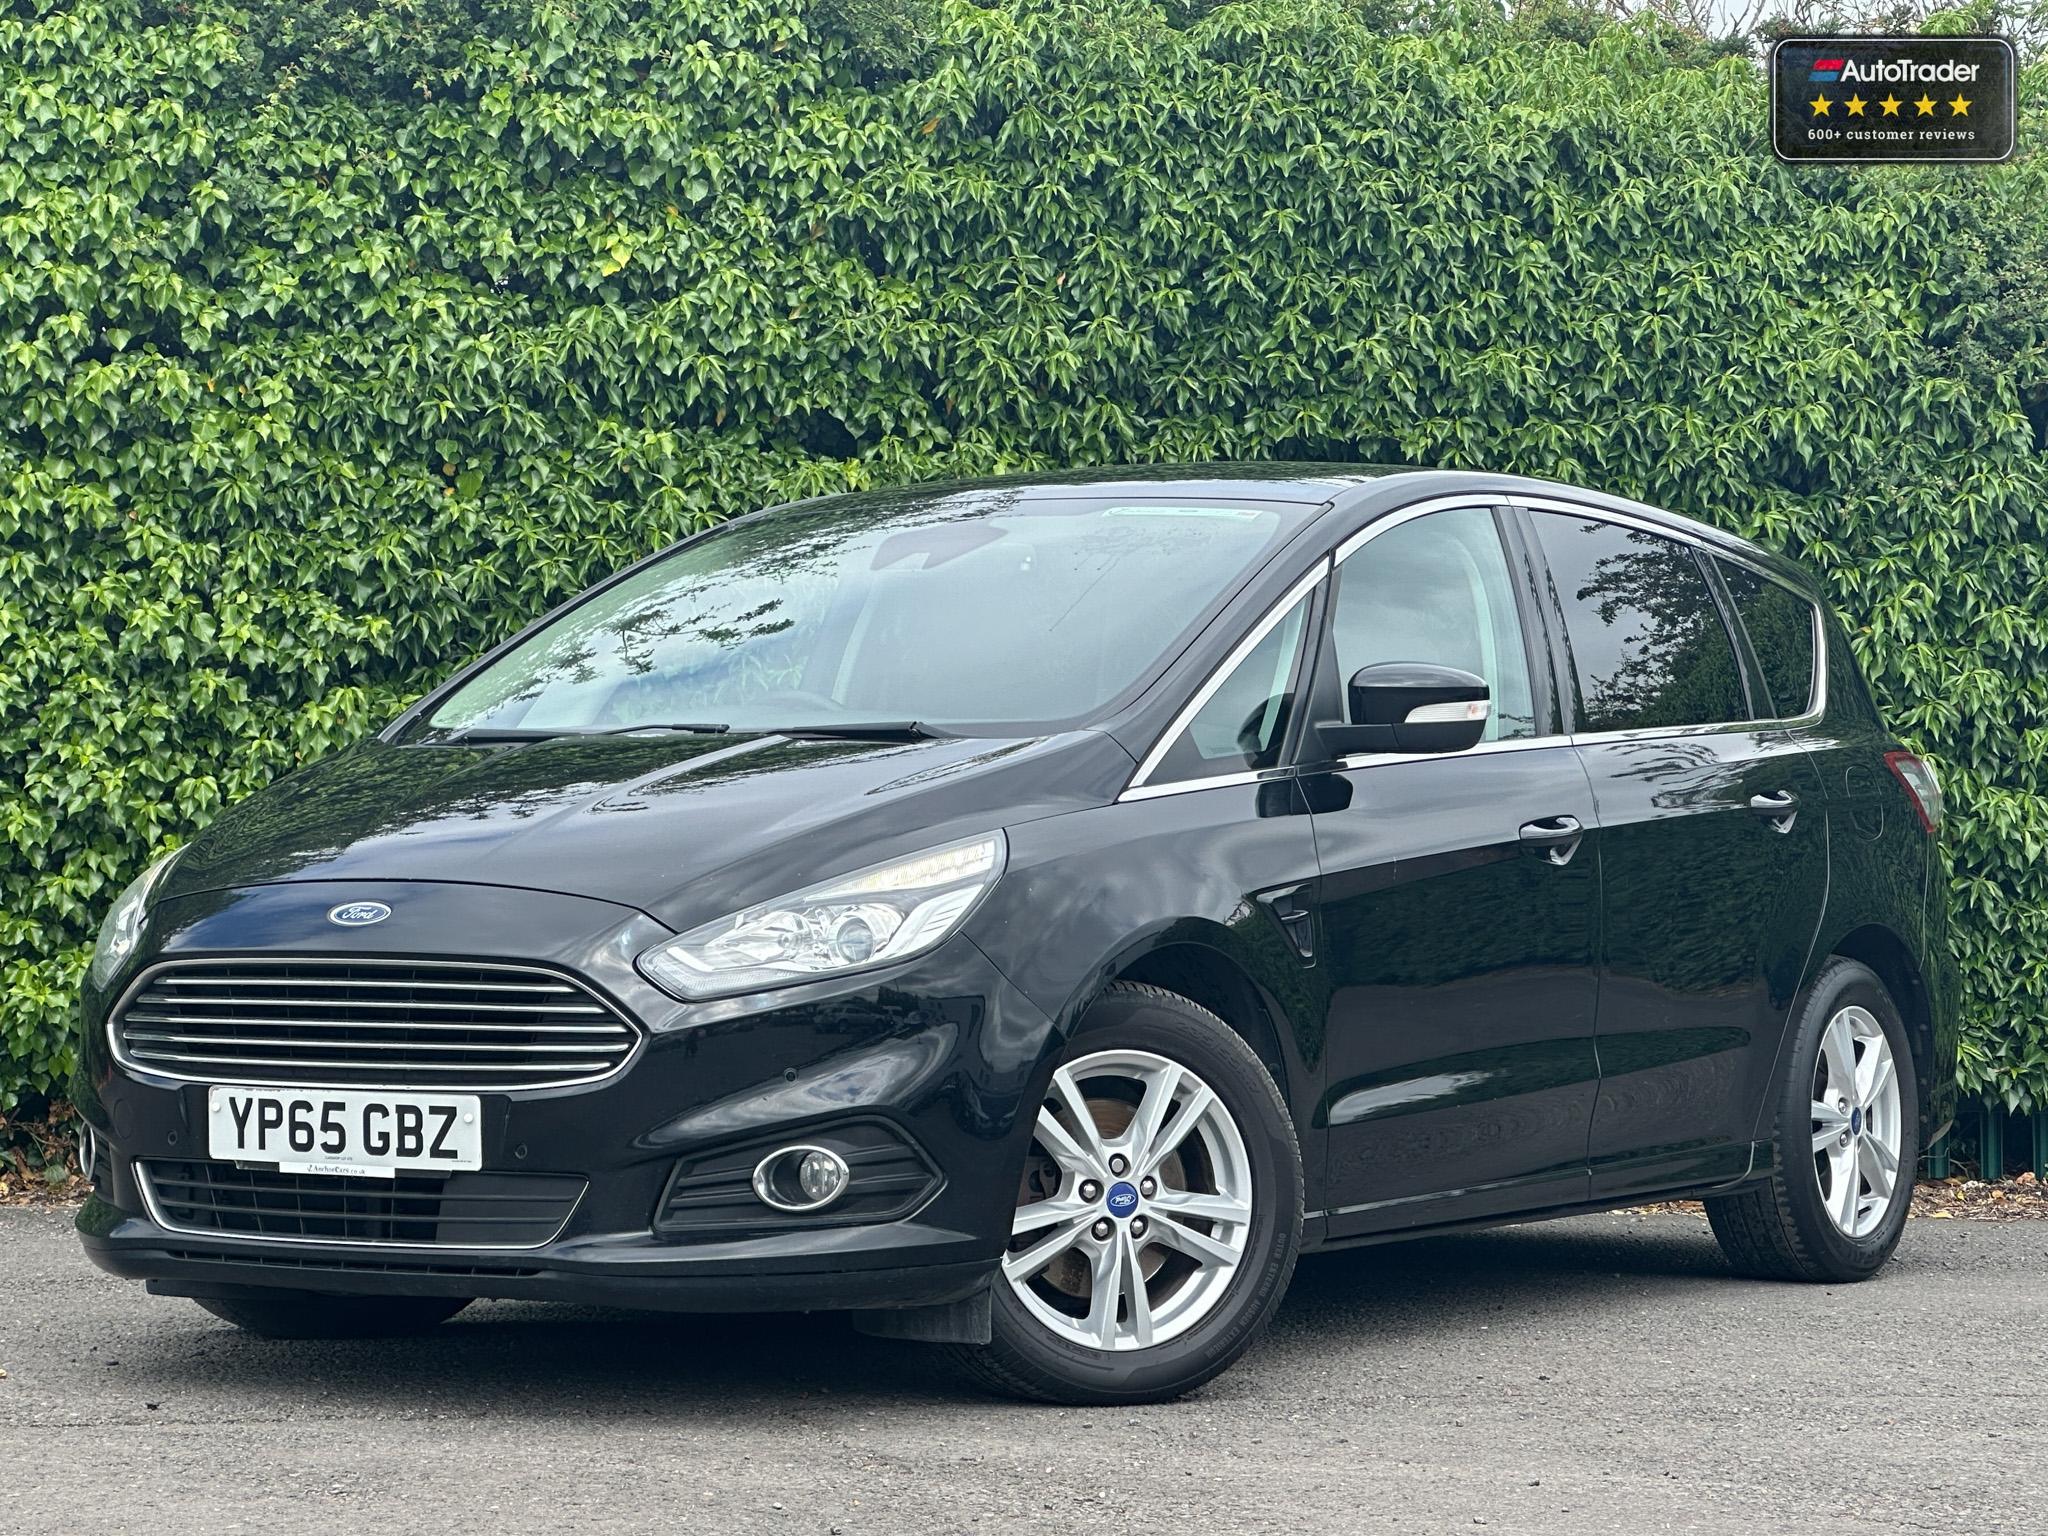 Ford S-Max YP65 GBZ